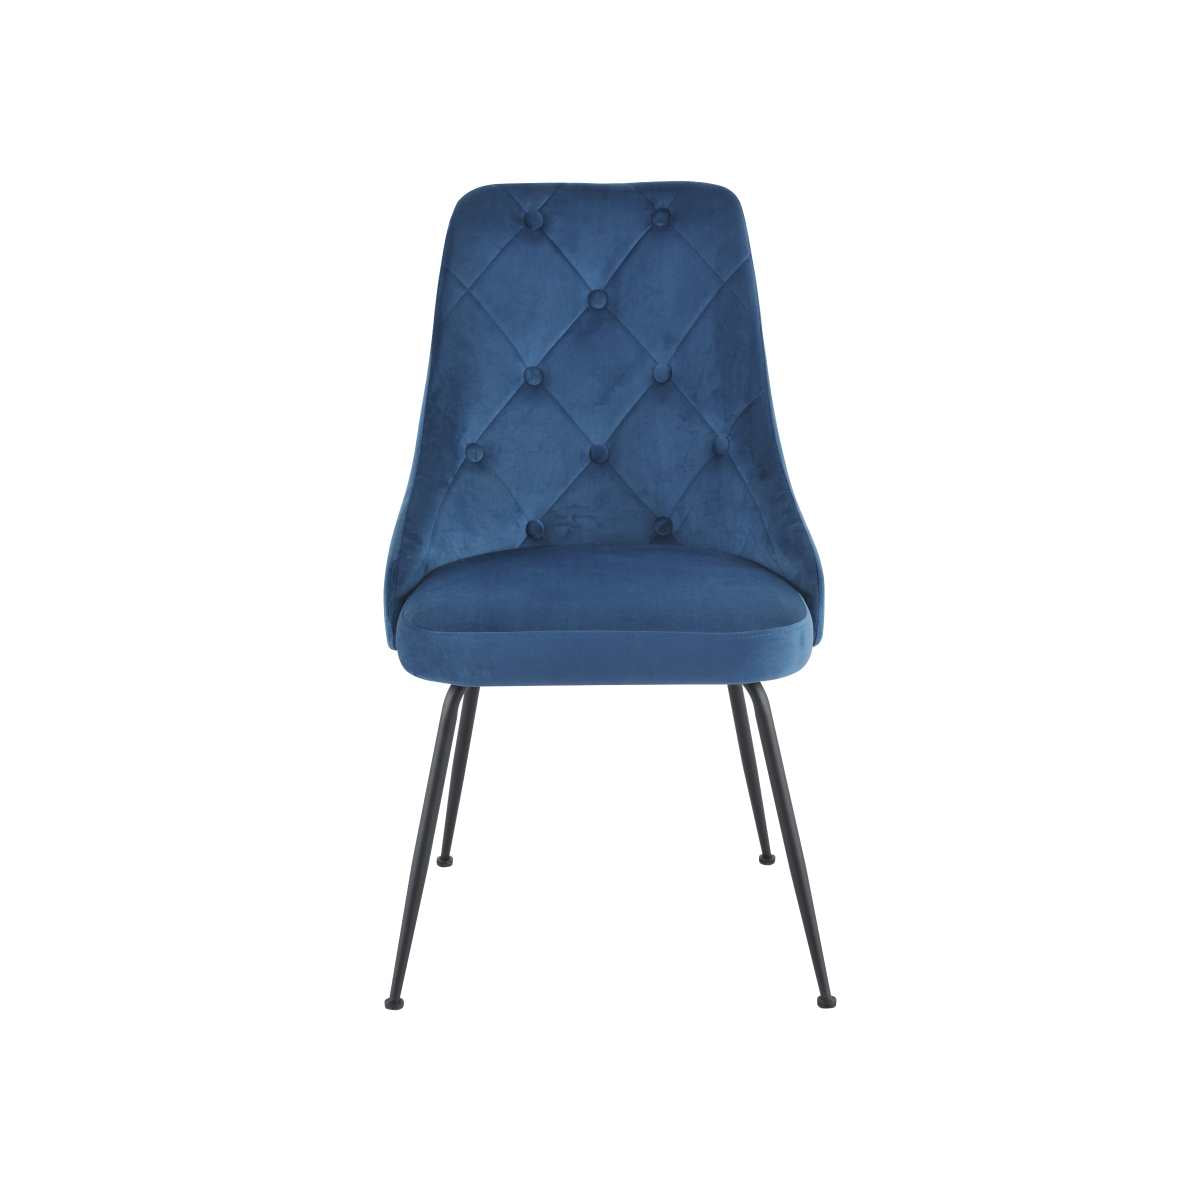 Plumeria Chairs Set Of 2 Blue With Black Legs 1321